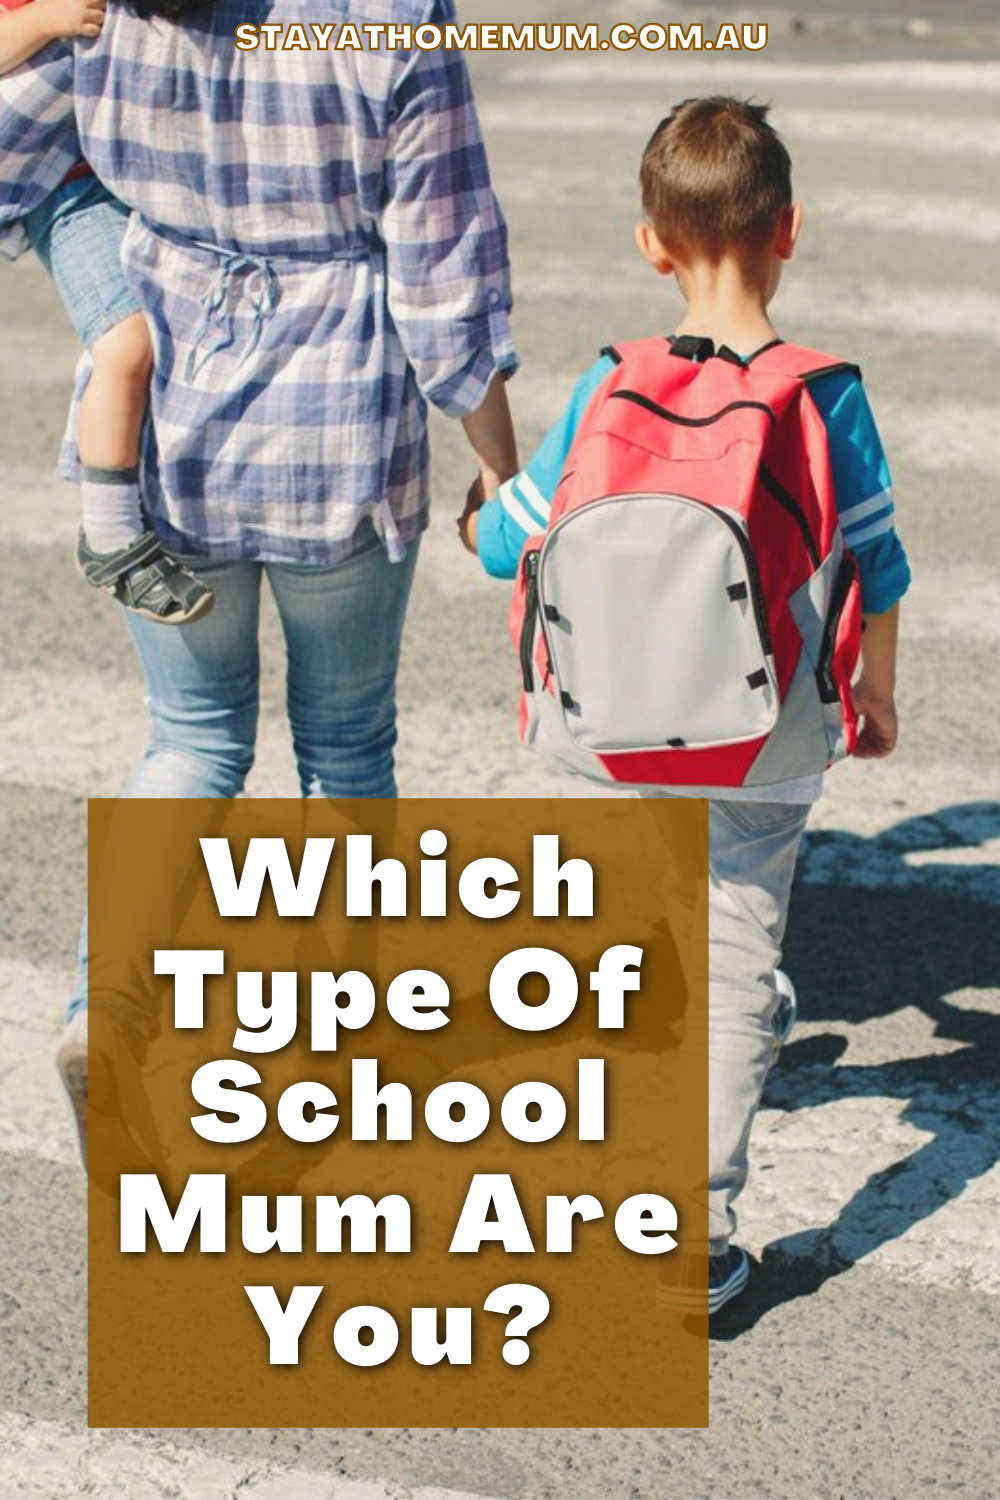 Which Type Of School Mum Are You? | Stay At Home Mum